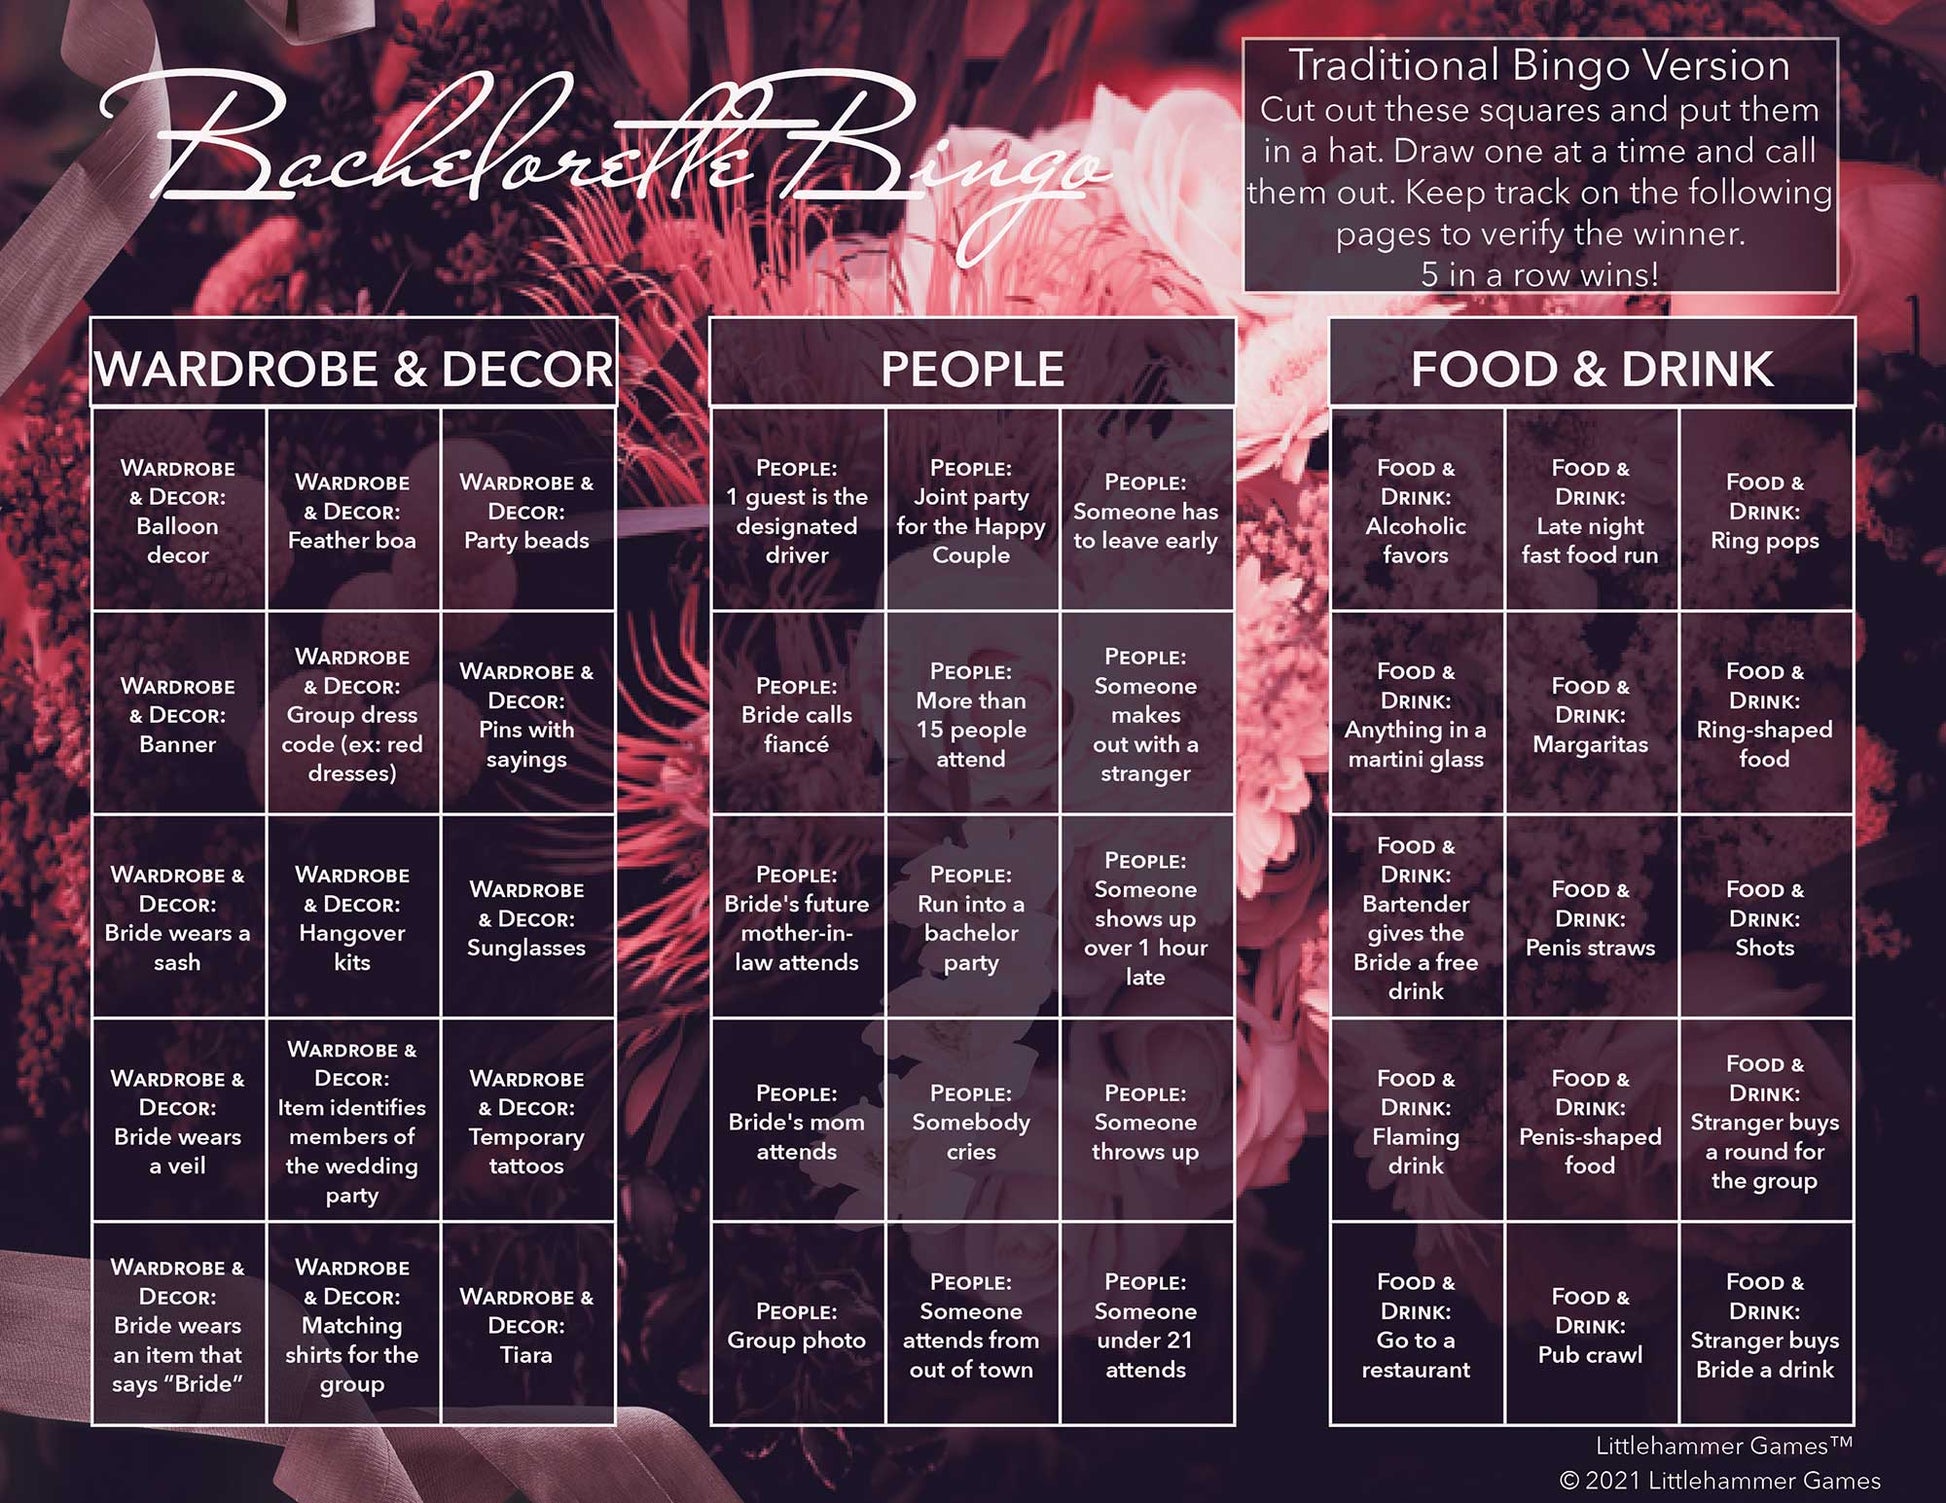 Bachelorette Bingo calling card with white text on a dark floral background